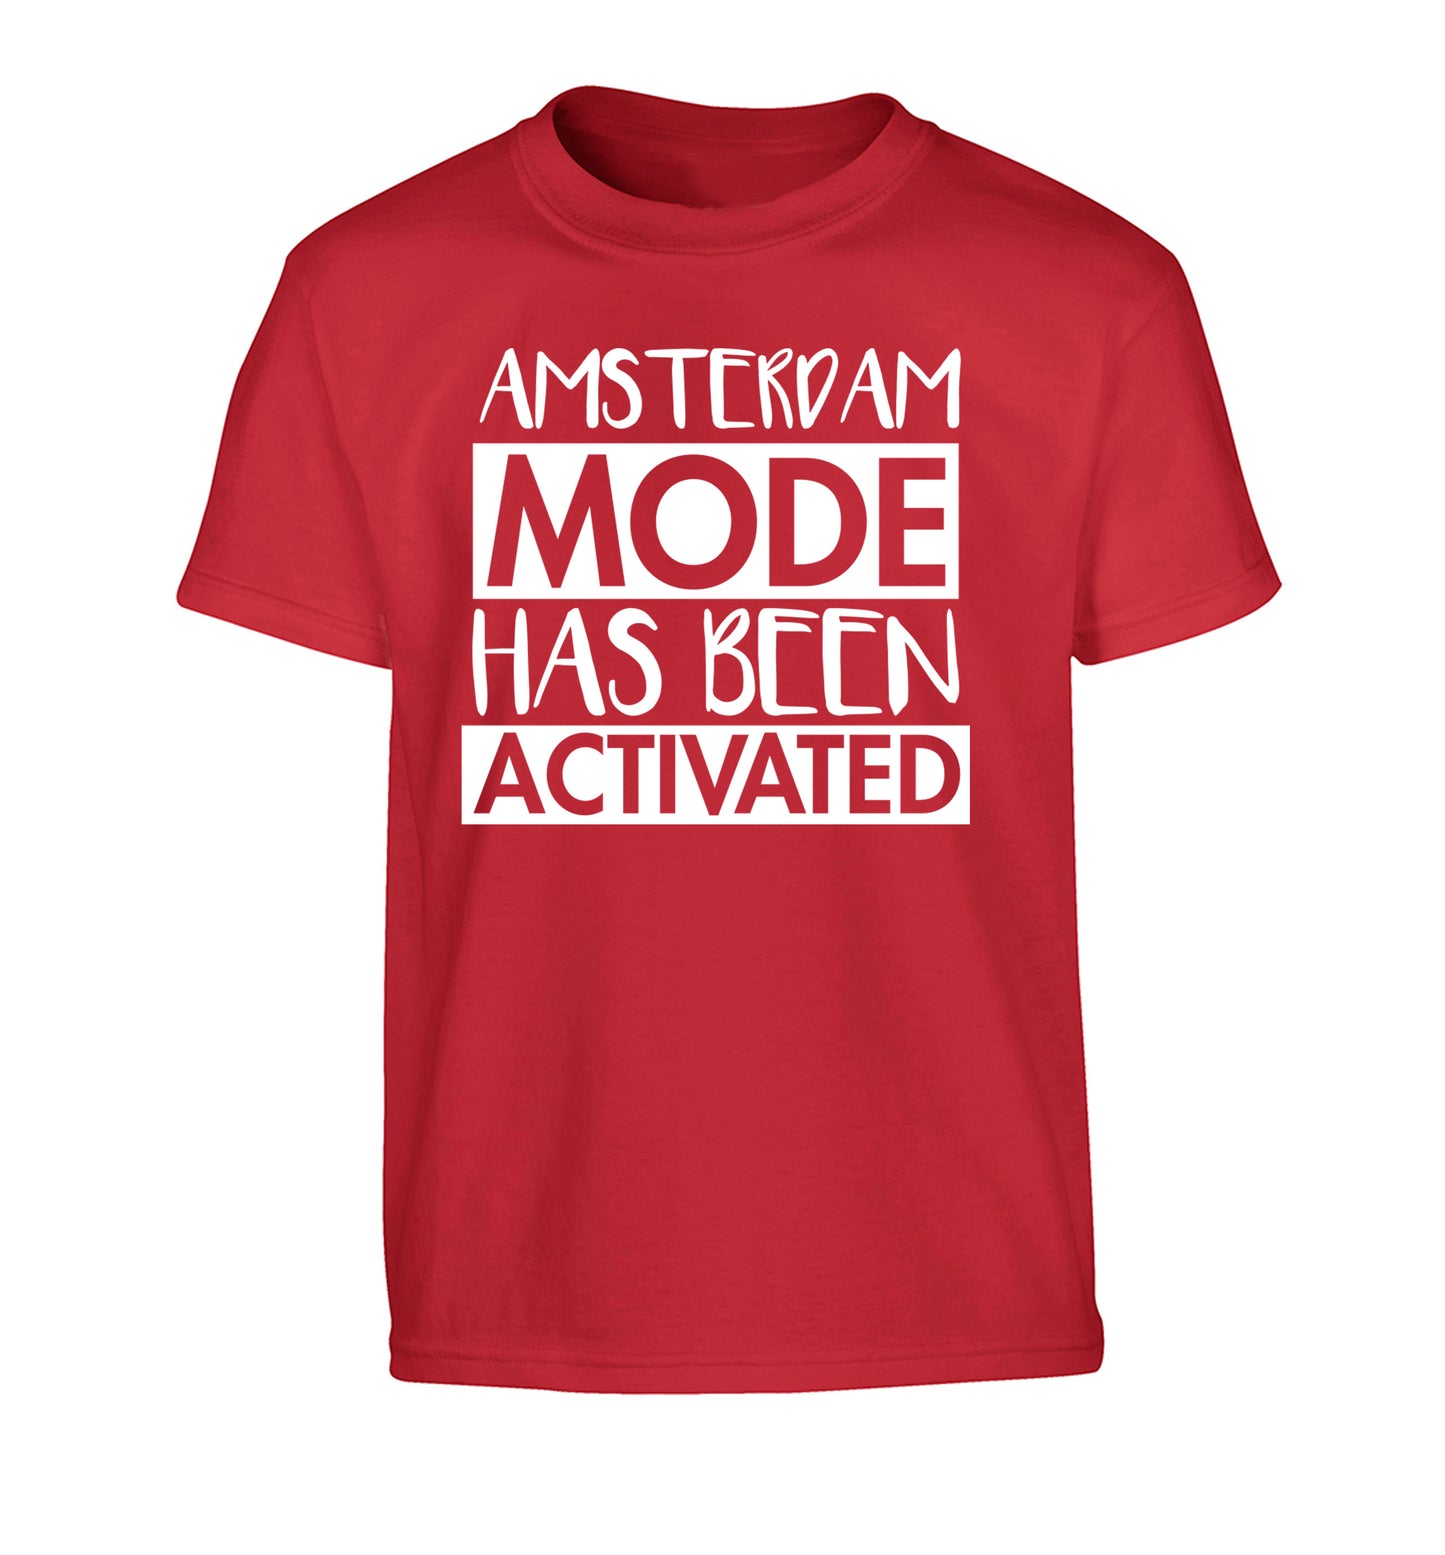 Amsterdam mode has been activated Children's red Tshirt 12-13 Years